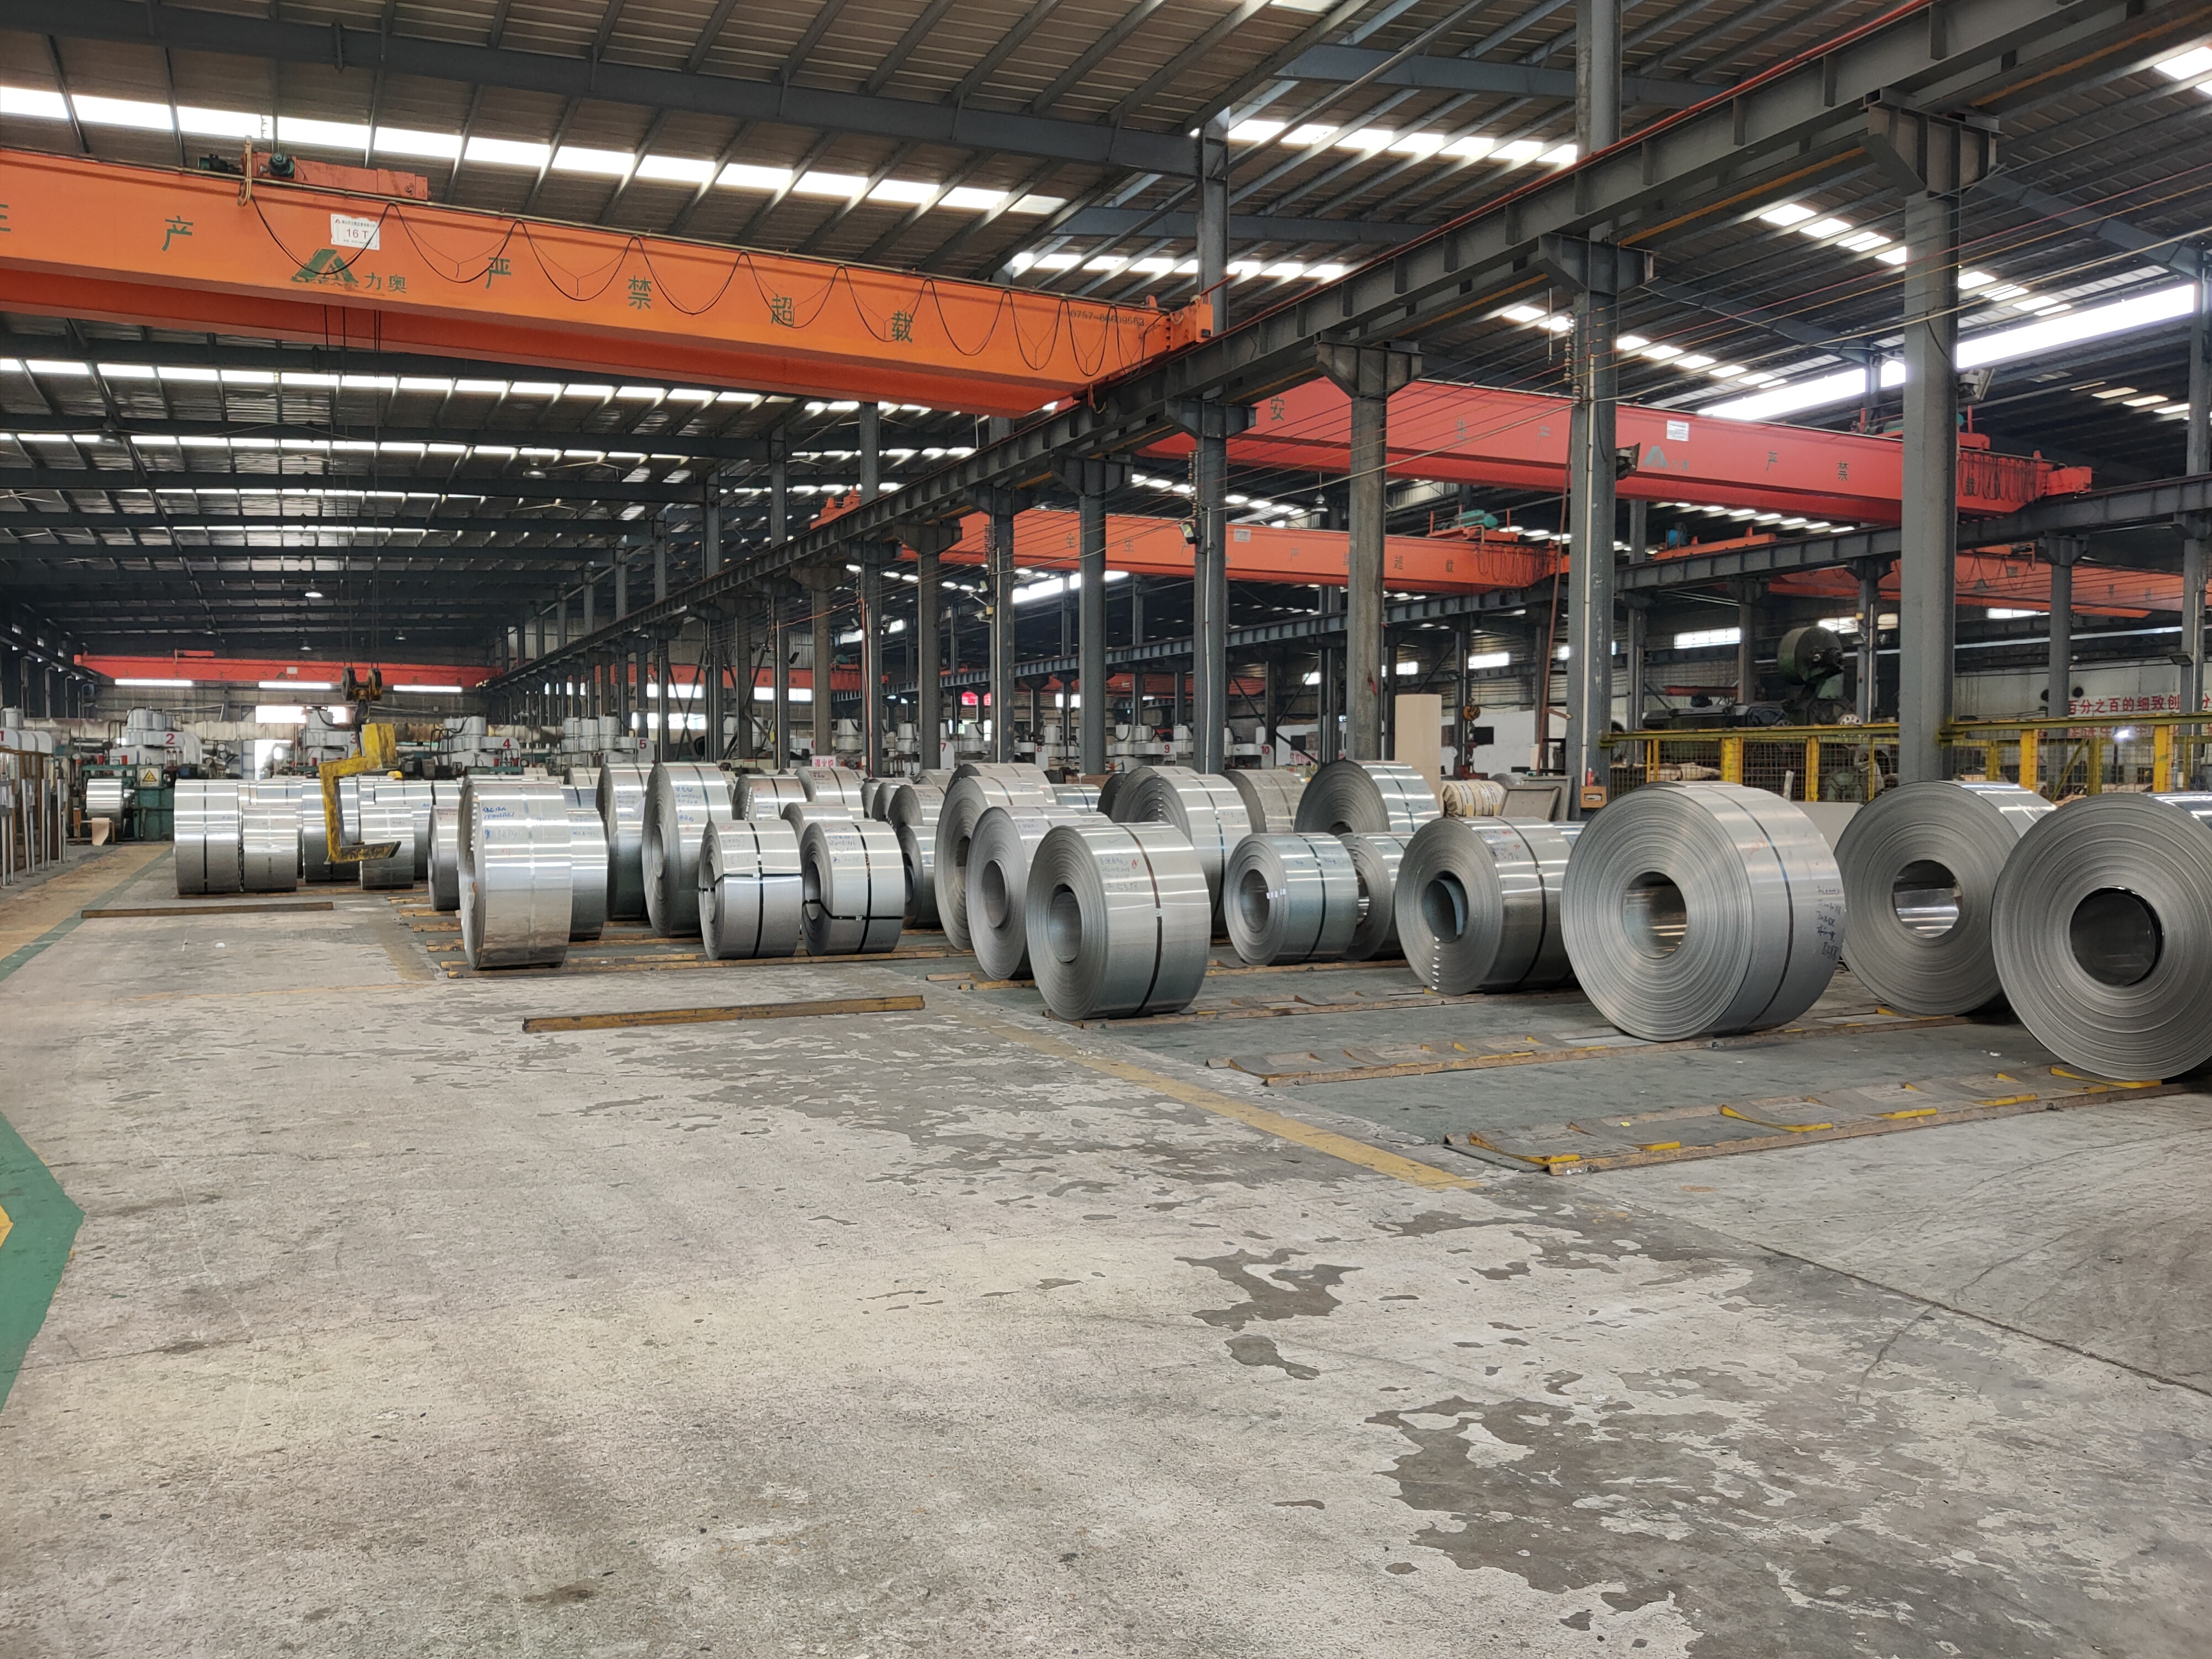 European Stainless Steel Mill Factories Reduce Production, Good Opportunity to Export